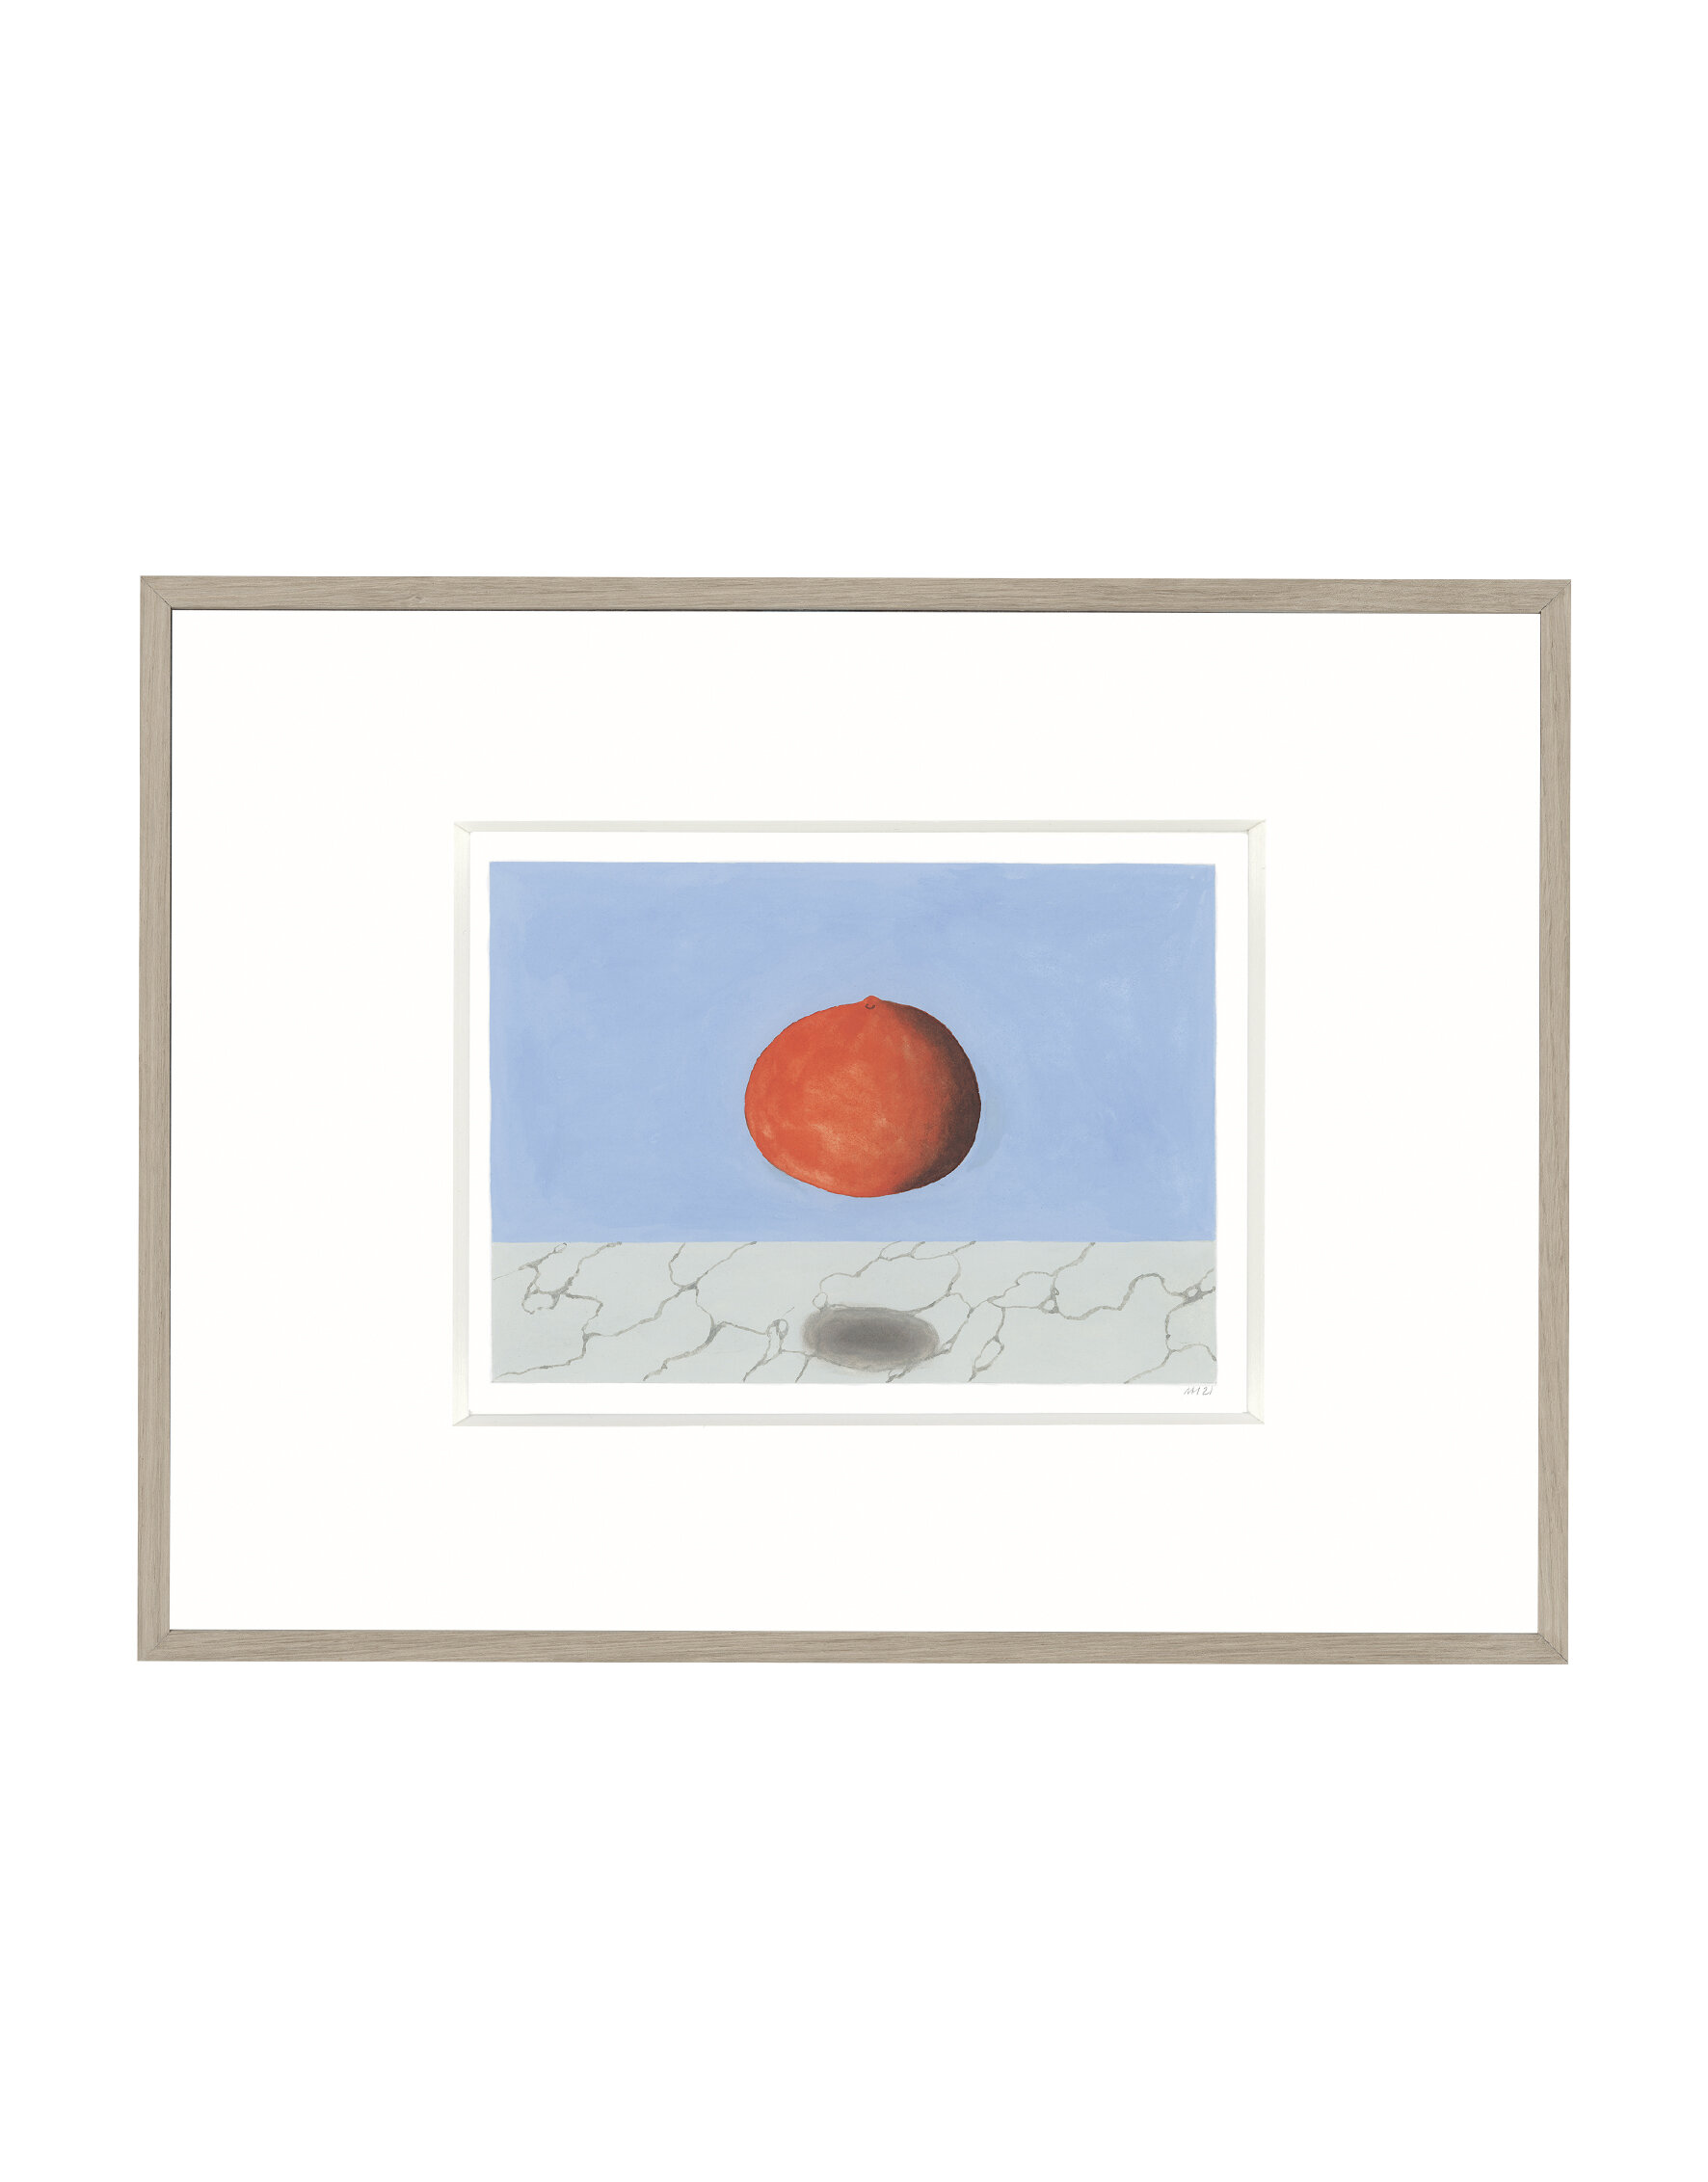 Title: Floating clementine